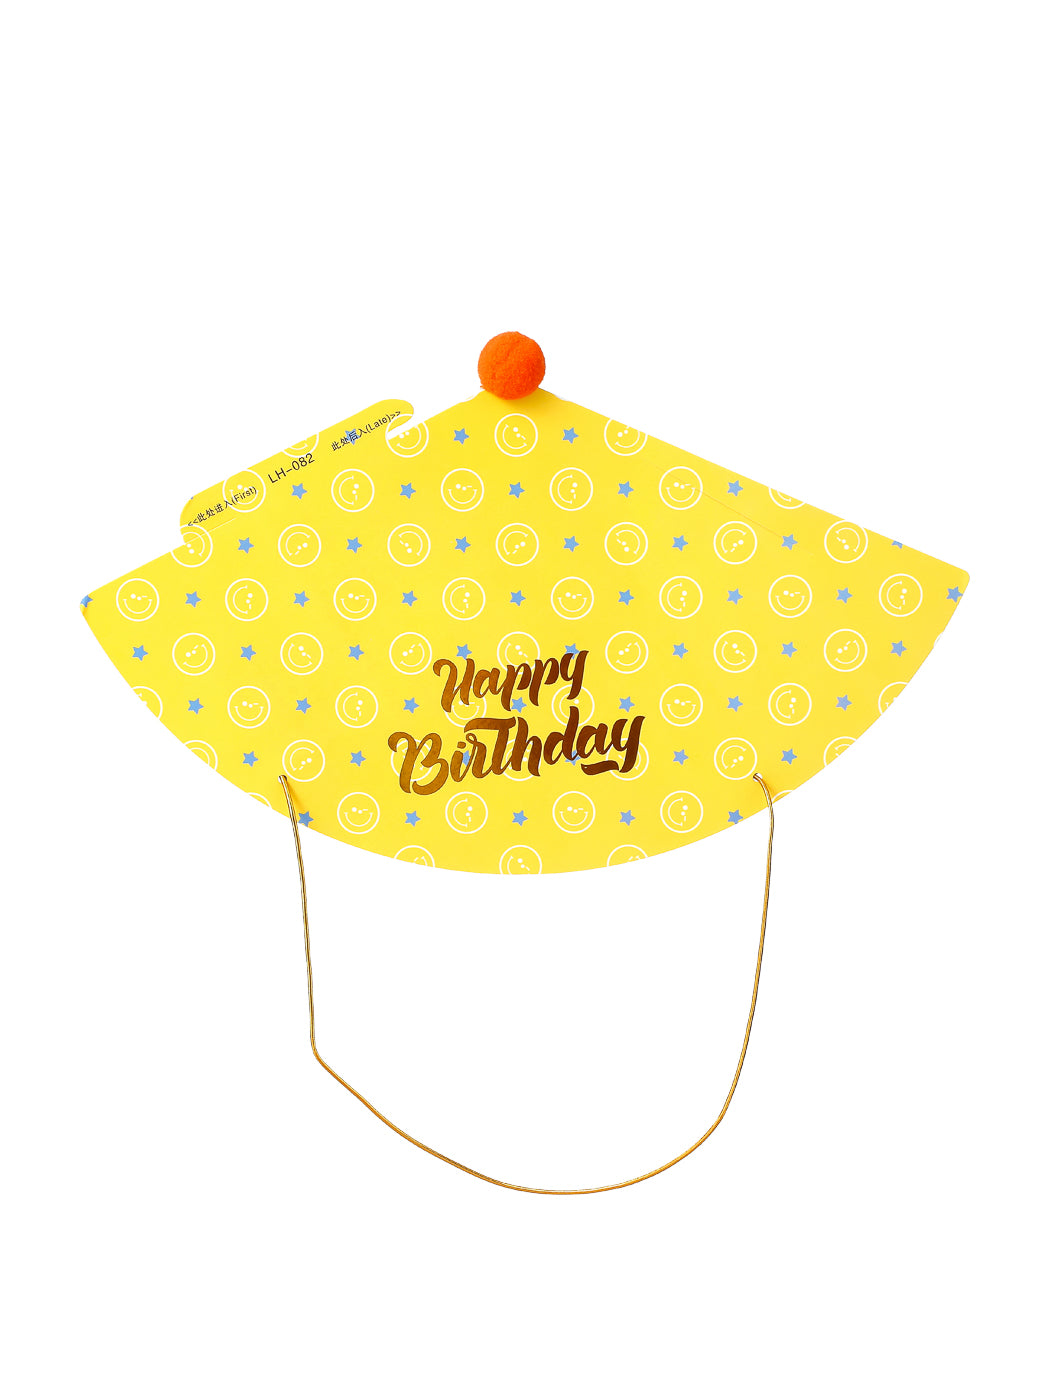 MINISO BIRTHDAY PARTY HAT(YELLOW, SMILEY FACE) 2010879911107 PARTY DECORATIONS